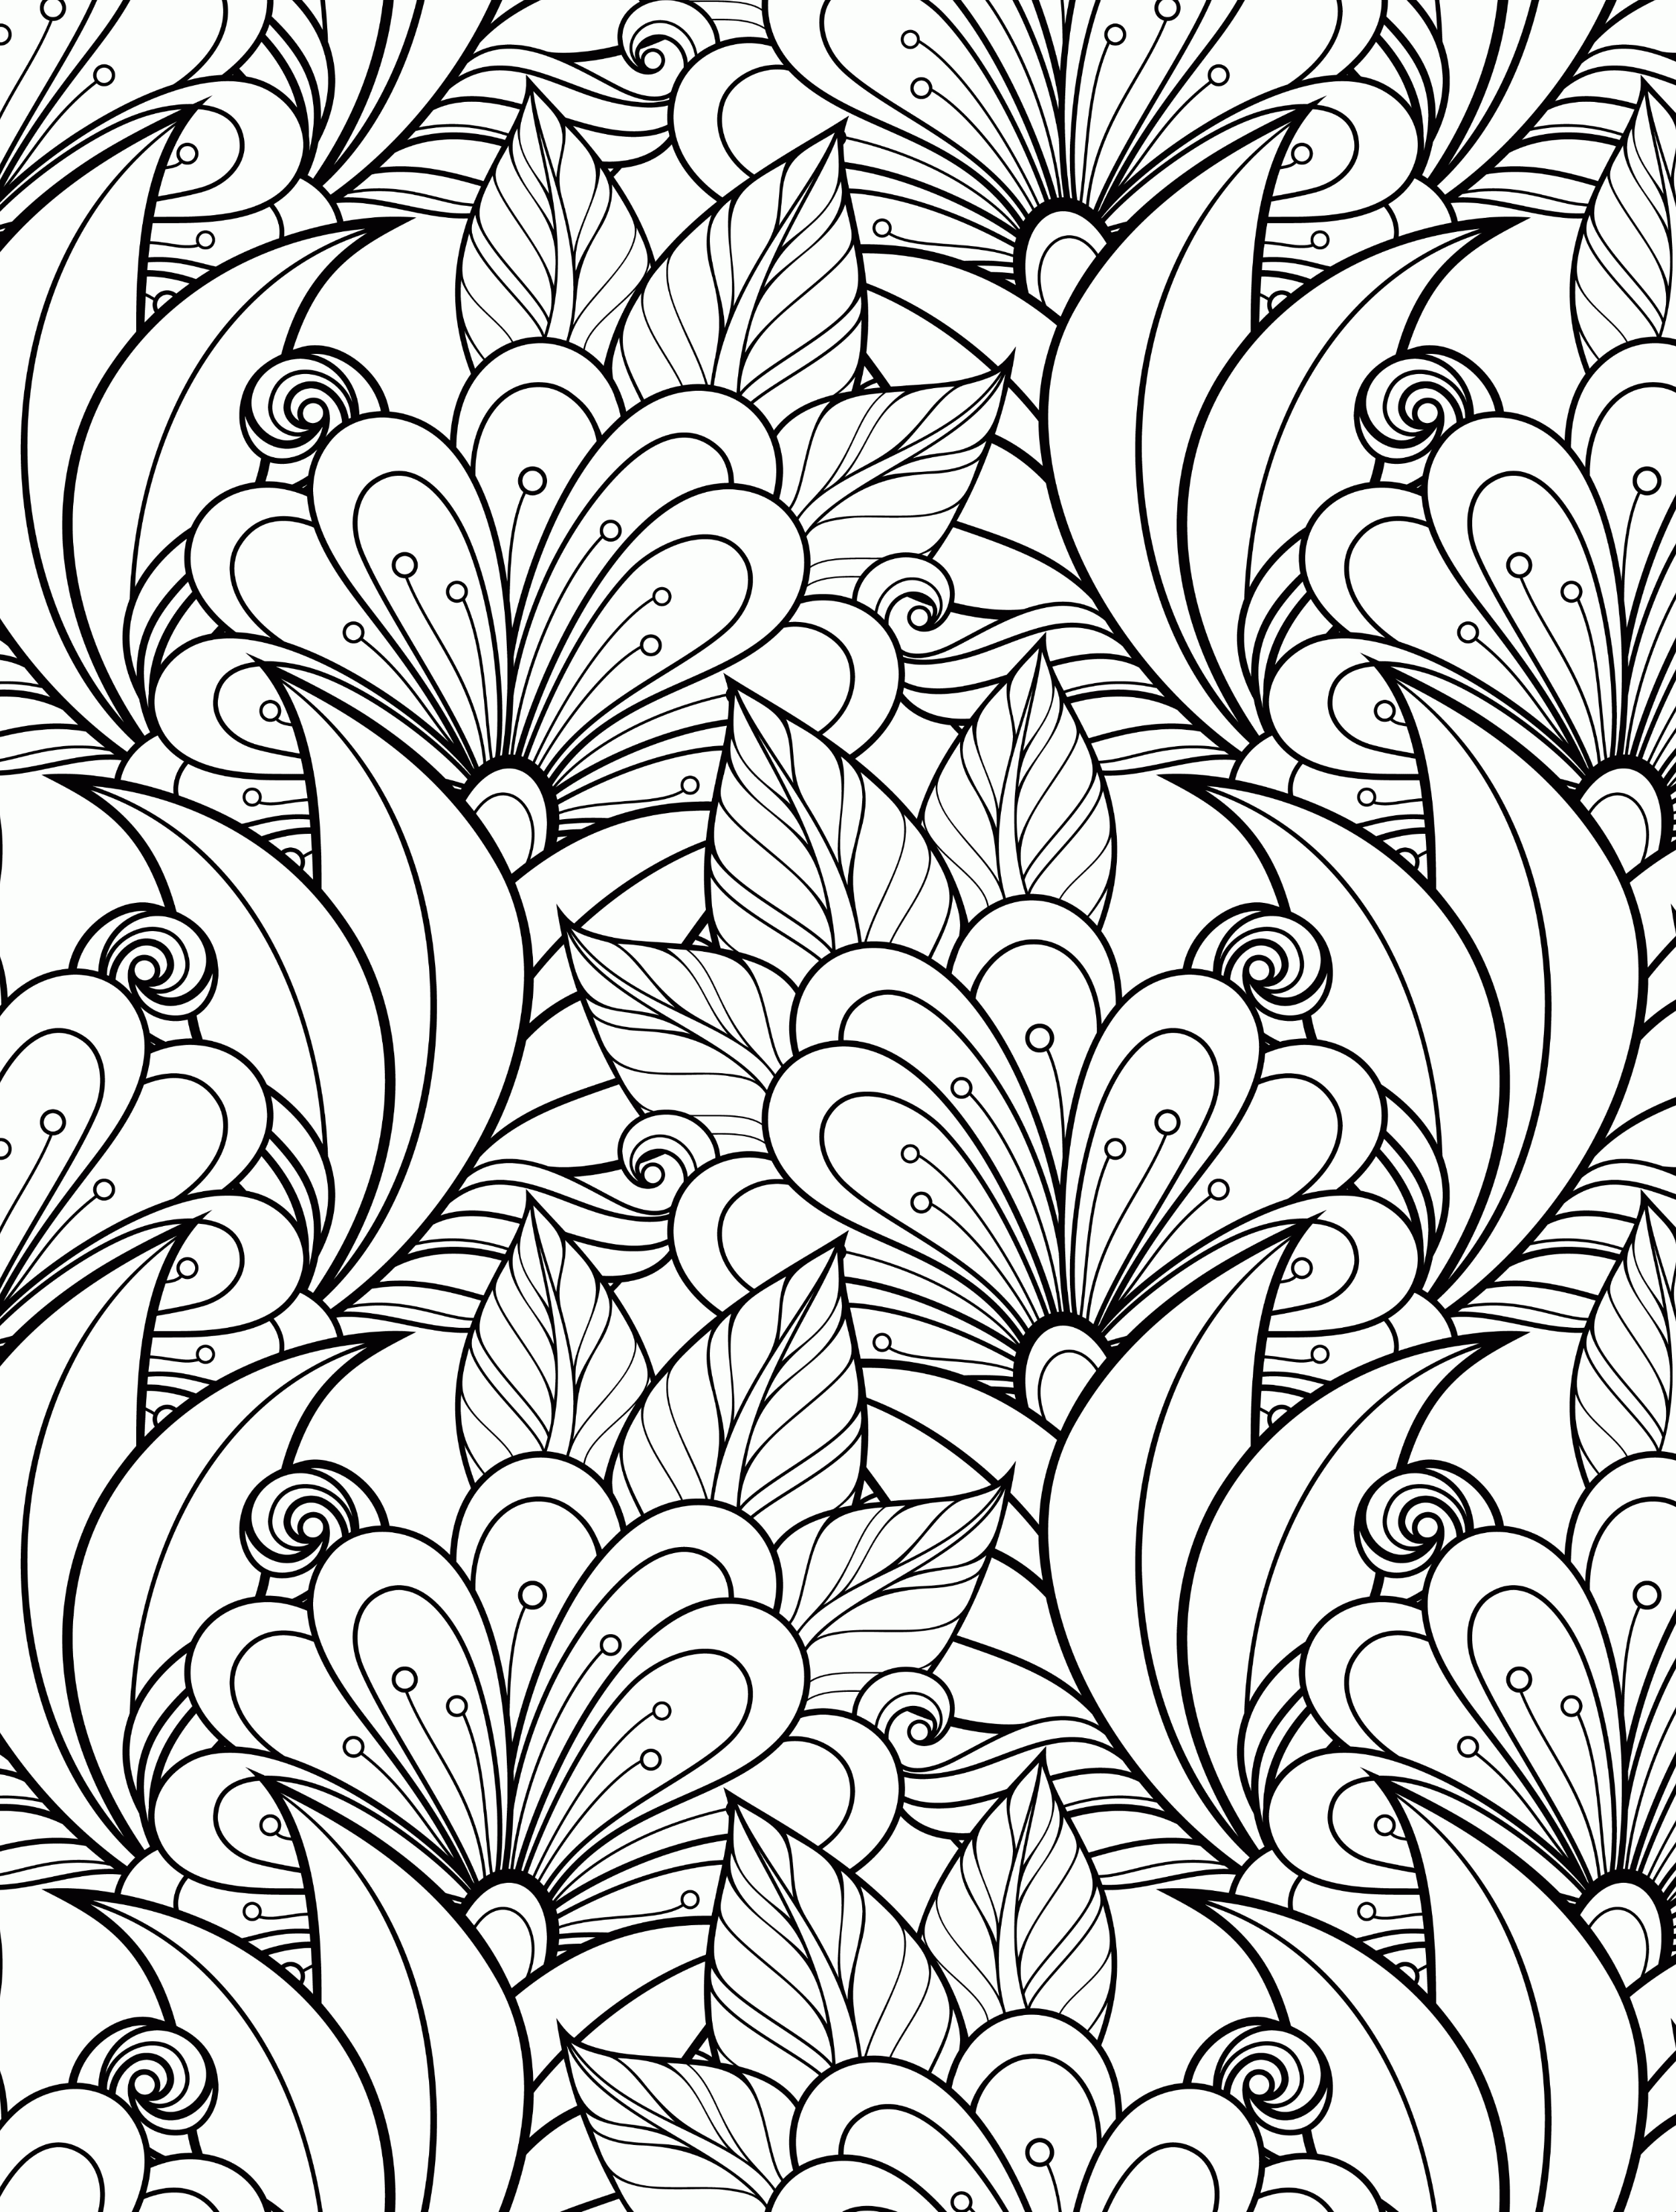 Download Free Printable Coloring Pages For Adults   Coloring Home